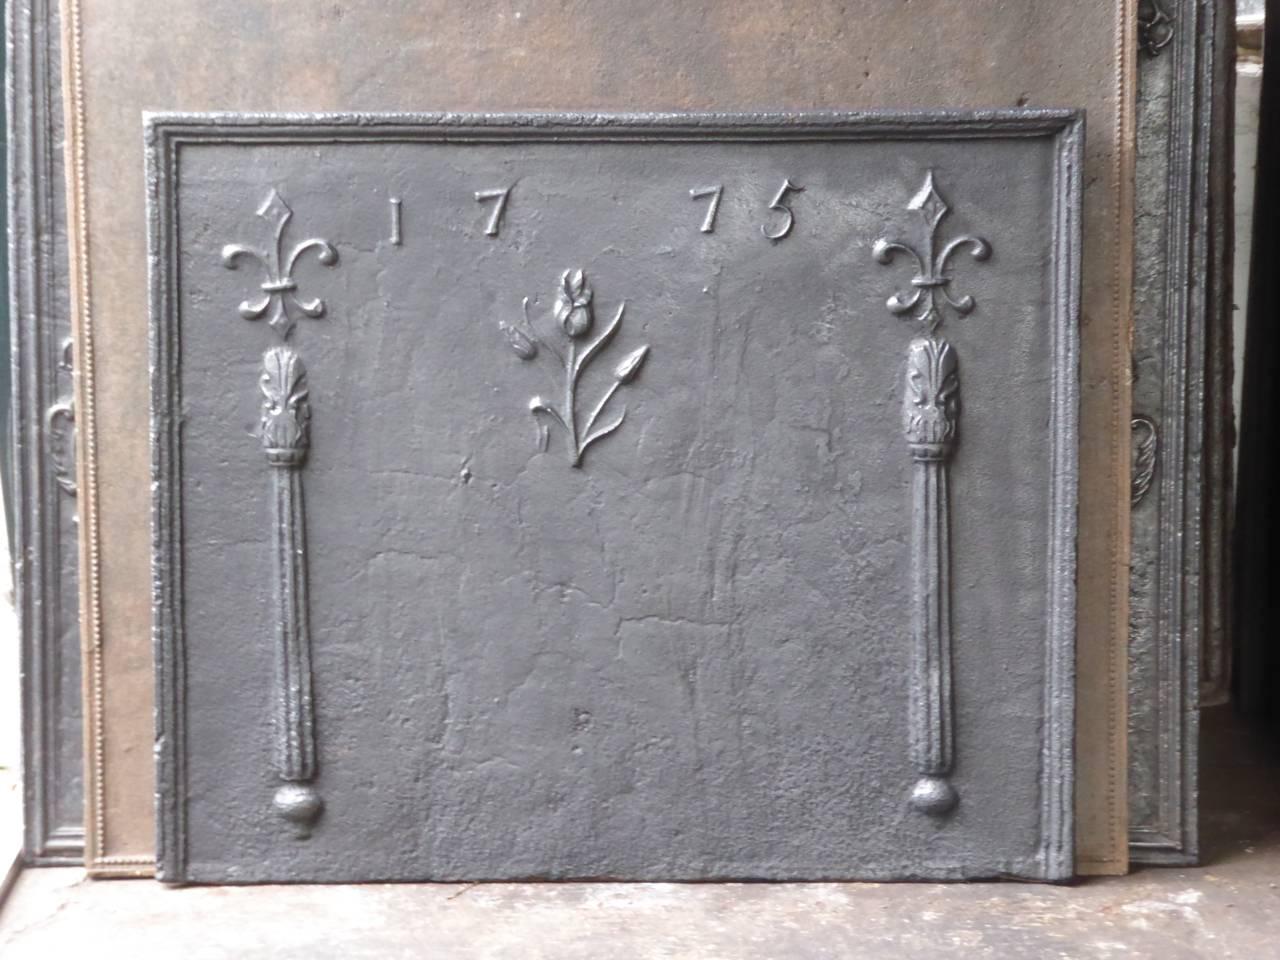 French fireback with two pillars with fleur-de-lys (French lilies) on top and a flower. The fireback is produced in 1775, which is cast in the fireback.

We have a unique and specialized collection of antique and used fireplace accessories